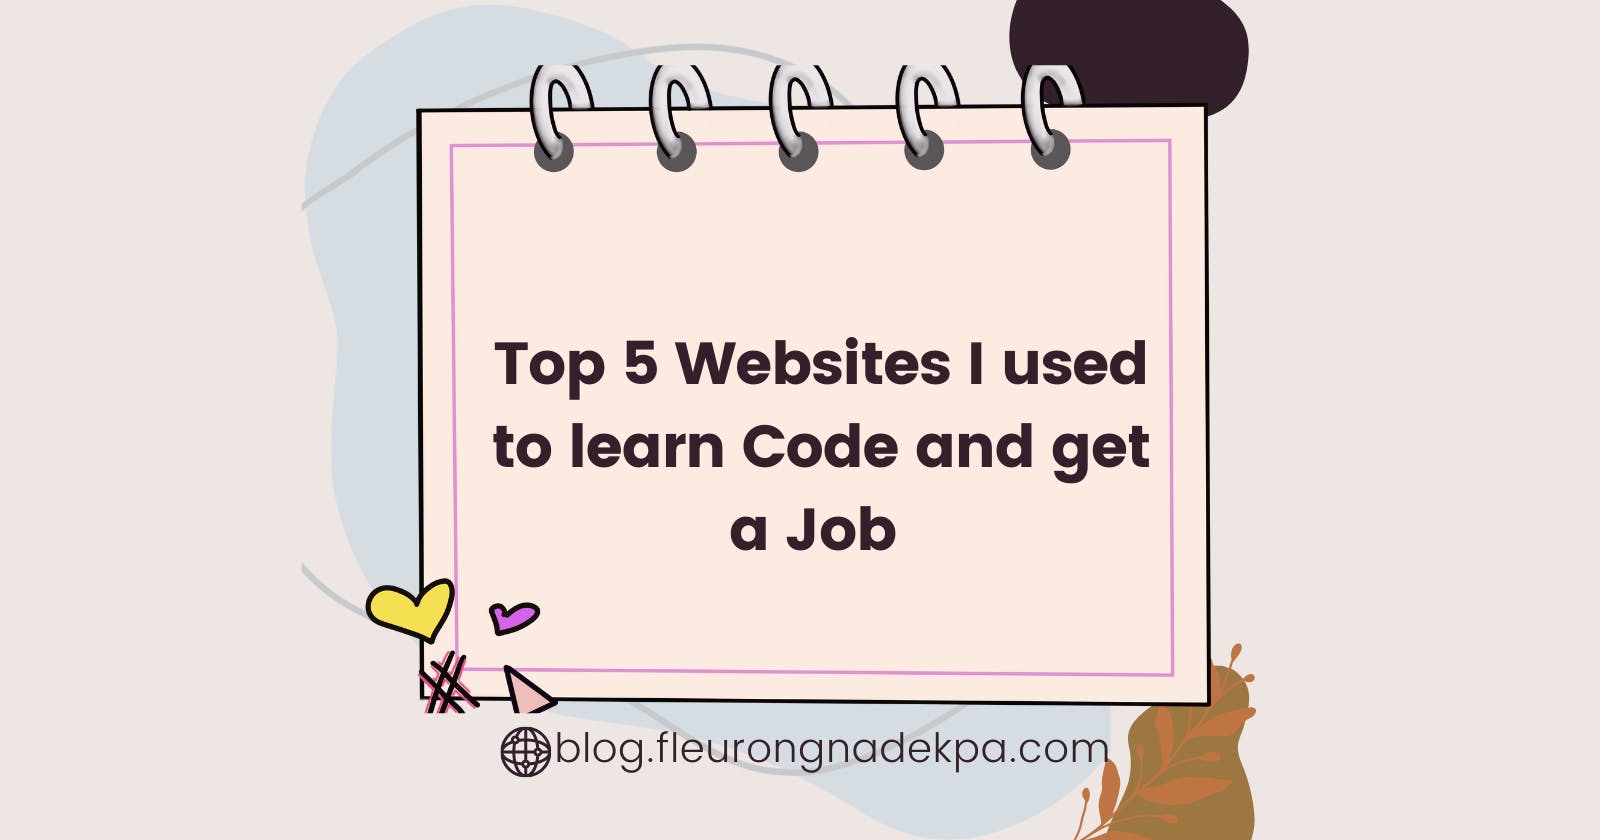 Top 5 Websites I used to learn Code and get a Job